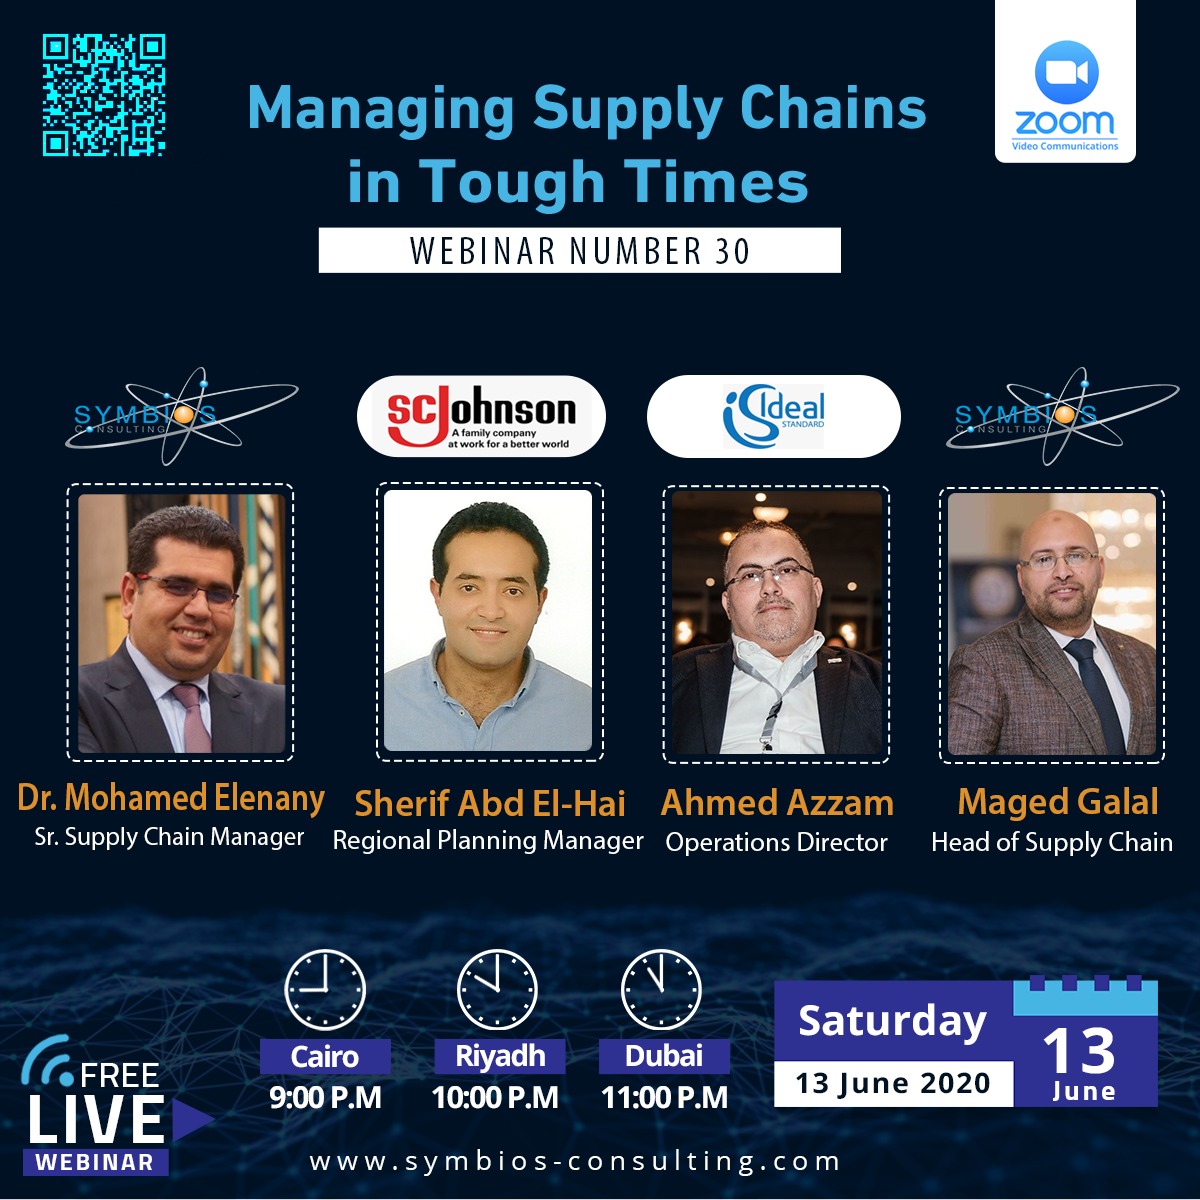 Managing Supply Chain in Tough Times